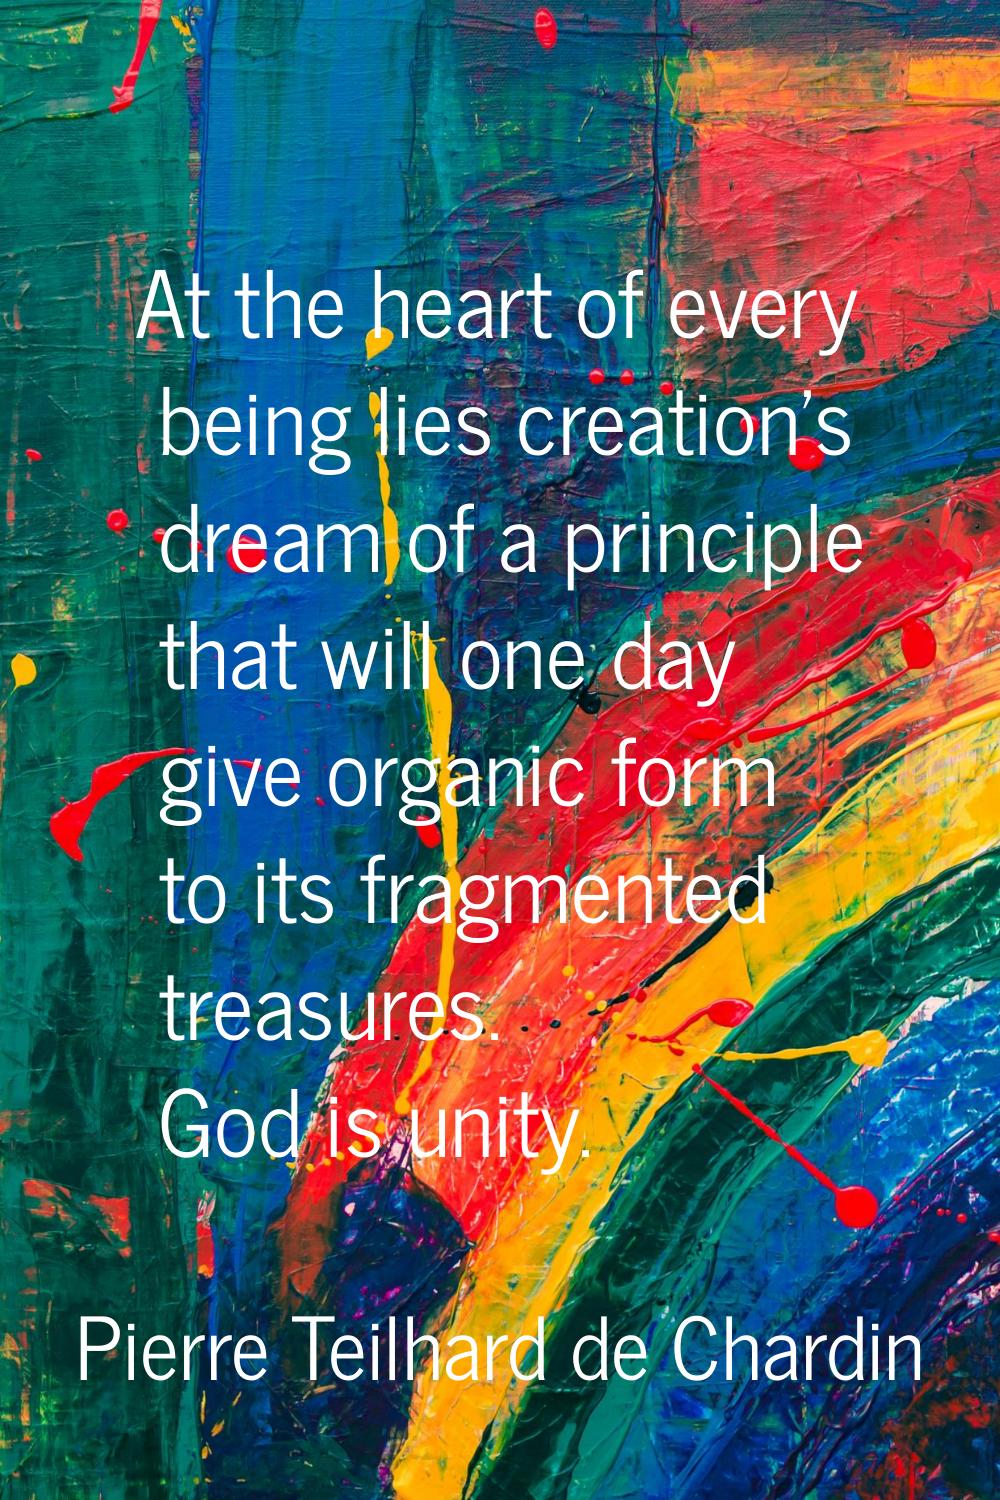 At the heart of every being lies creation's dream of a principle that will one day give organic for